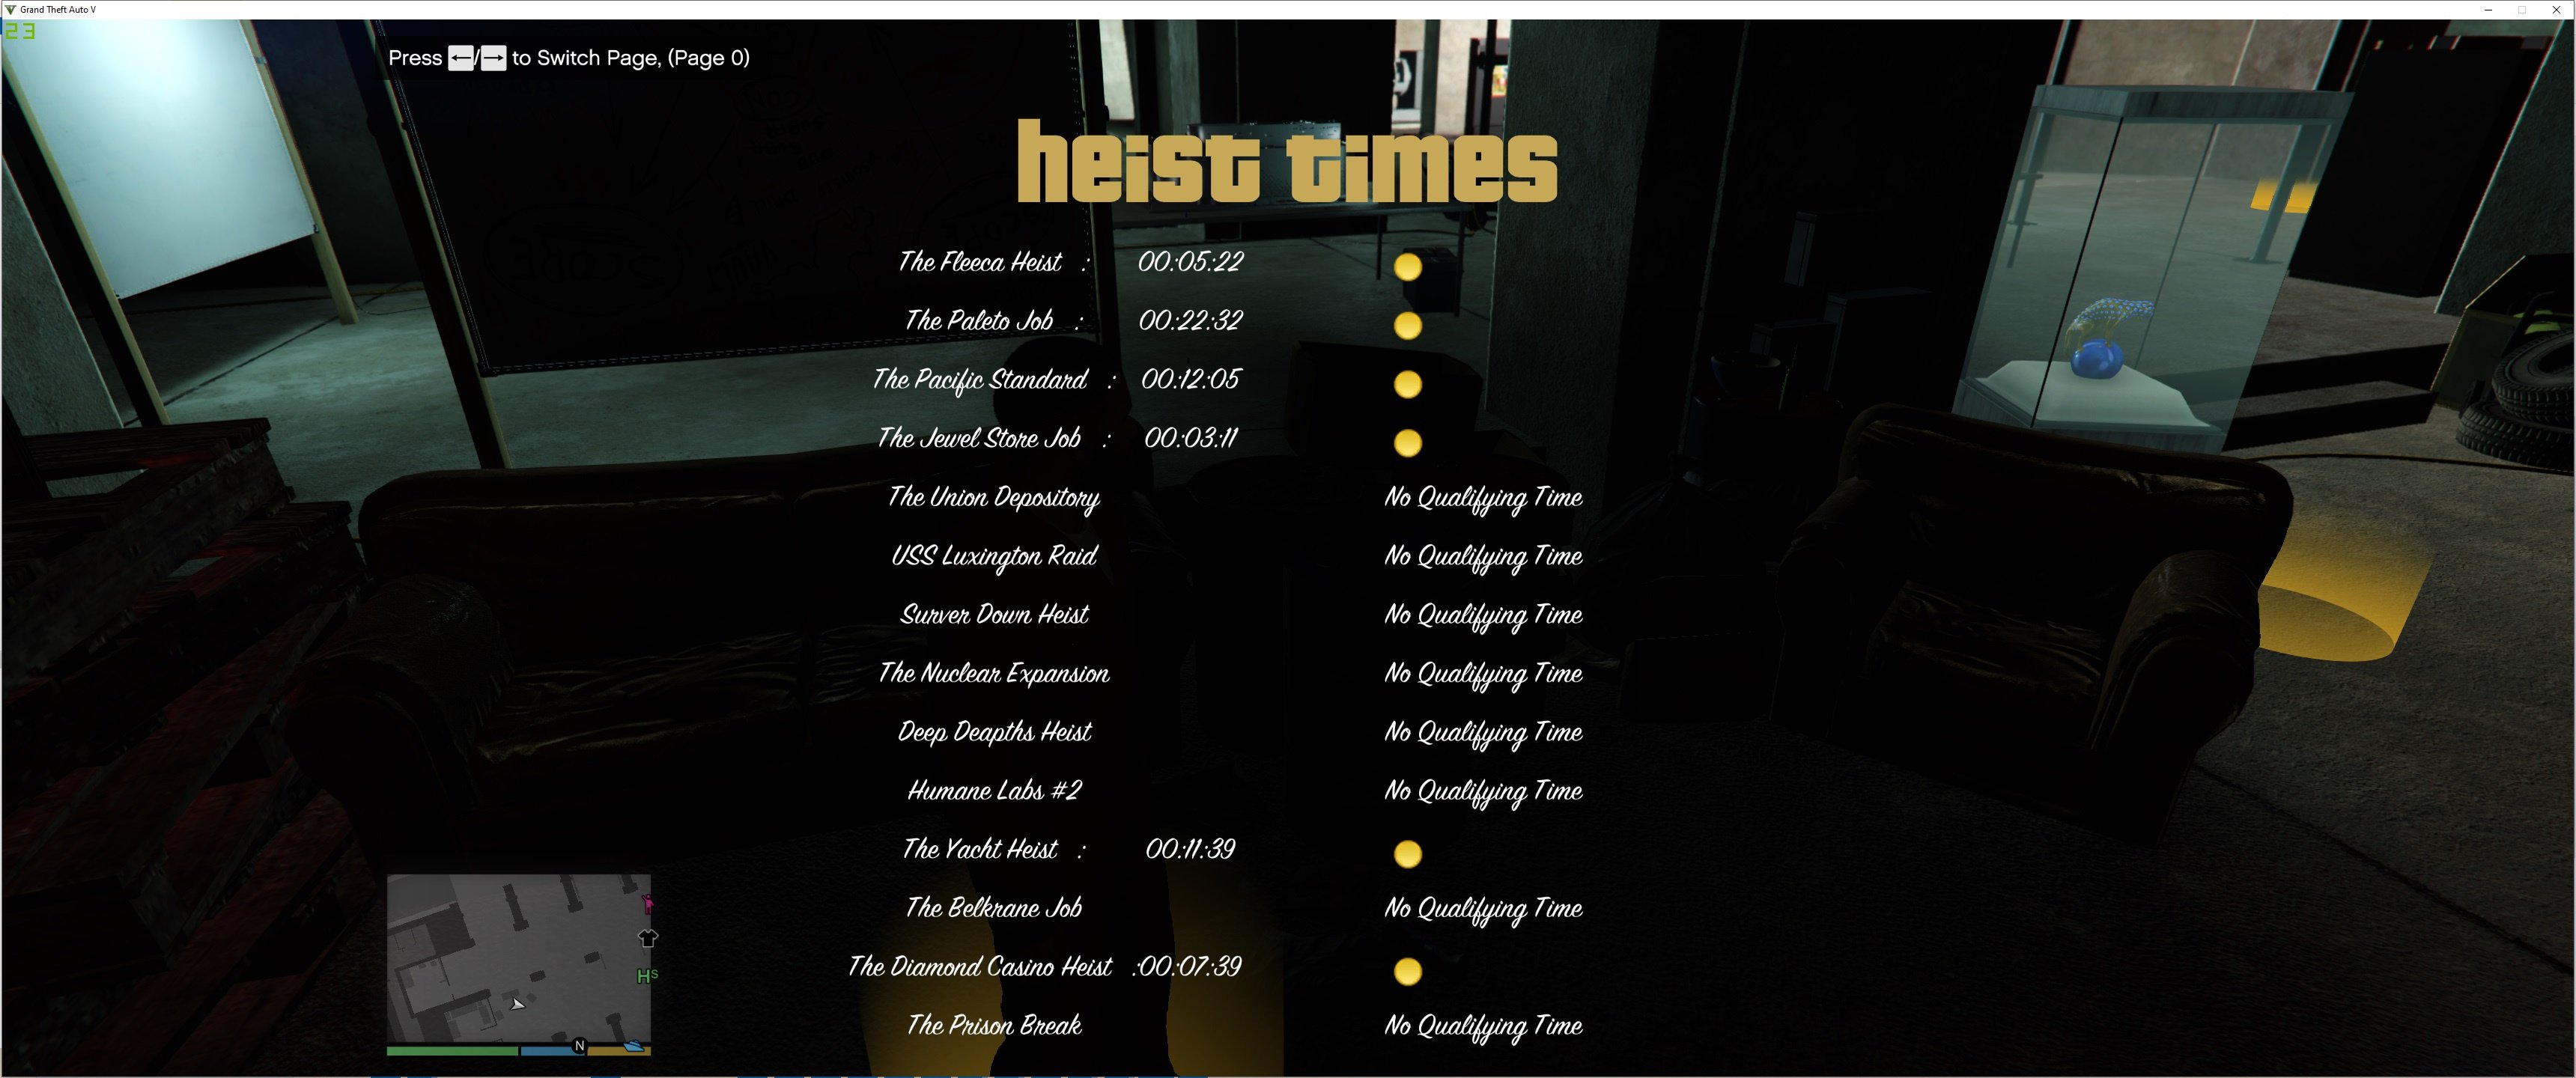 How to install The Payday Single Player Heist Mod 3.0 (2020) GTA 5 MODS